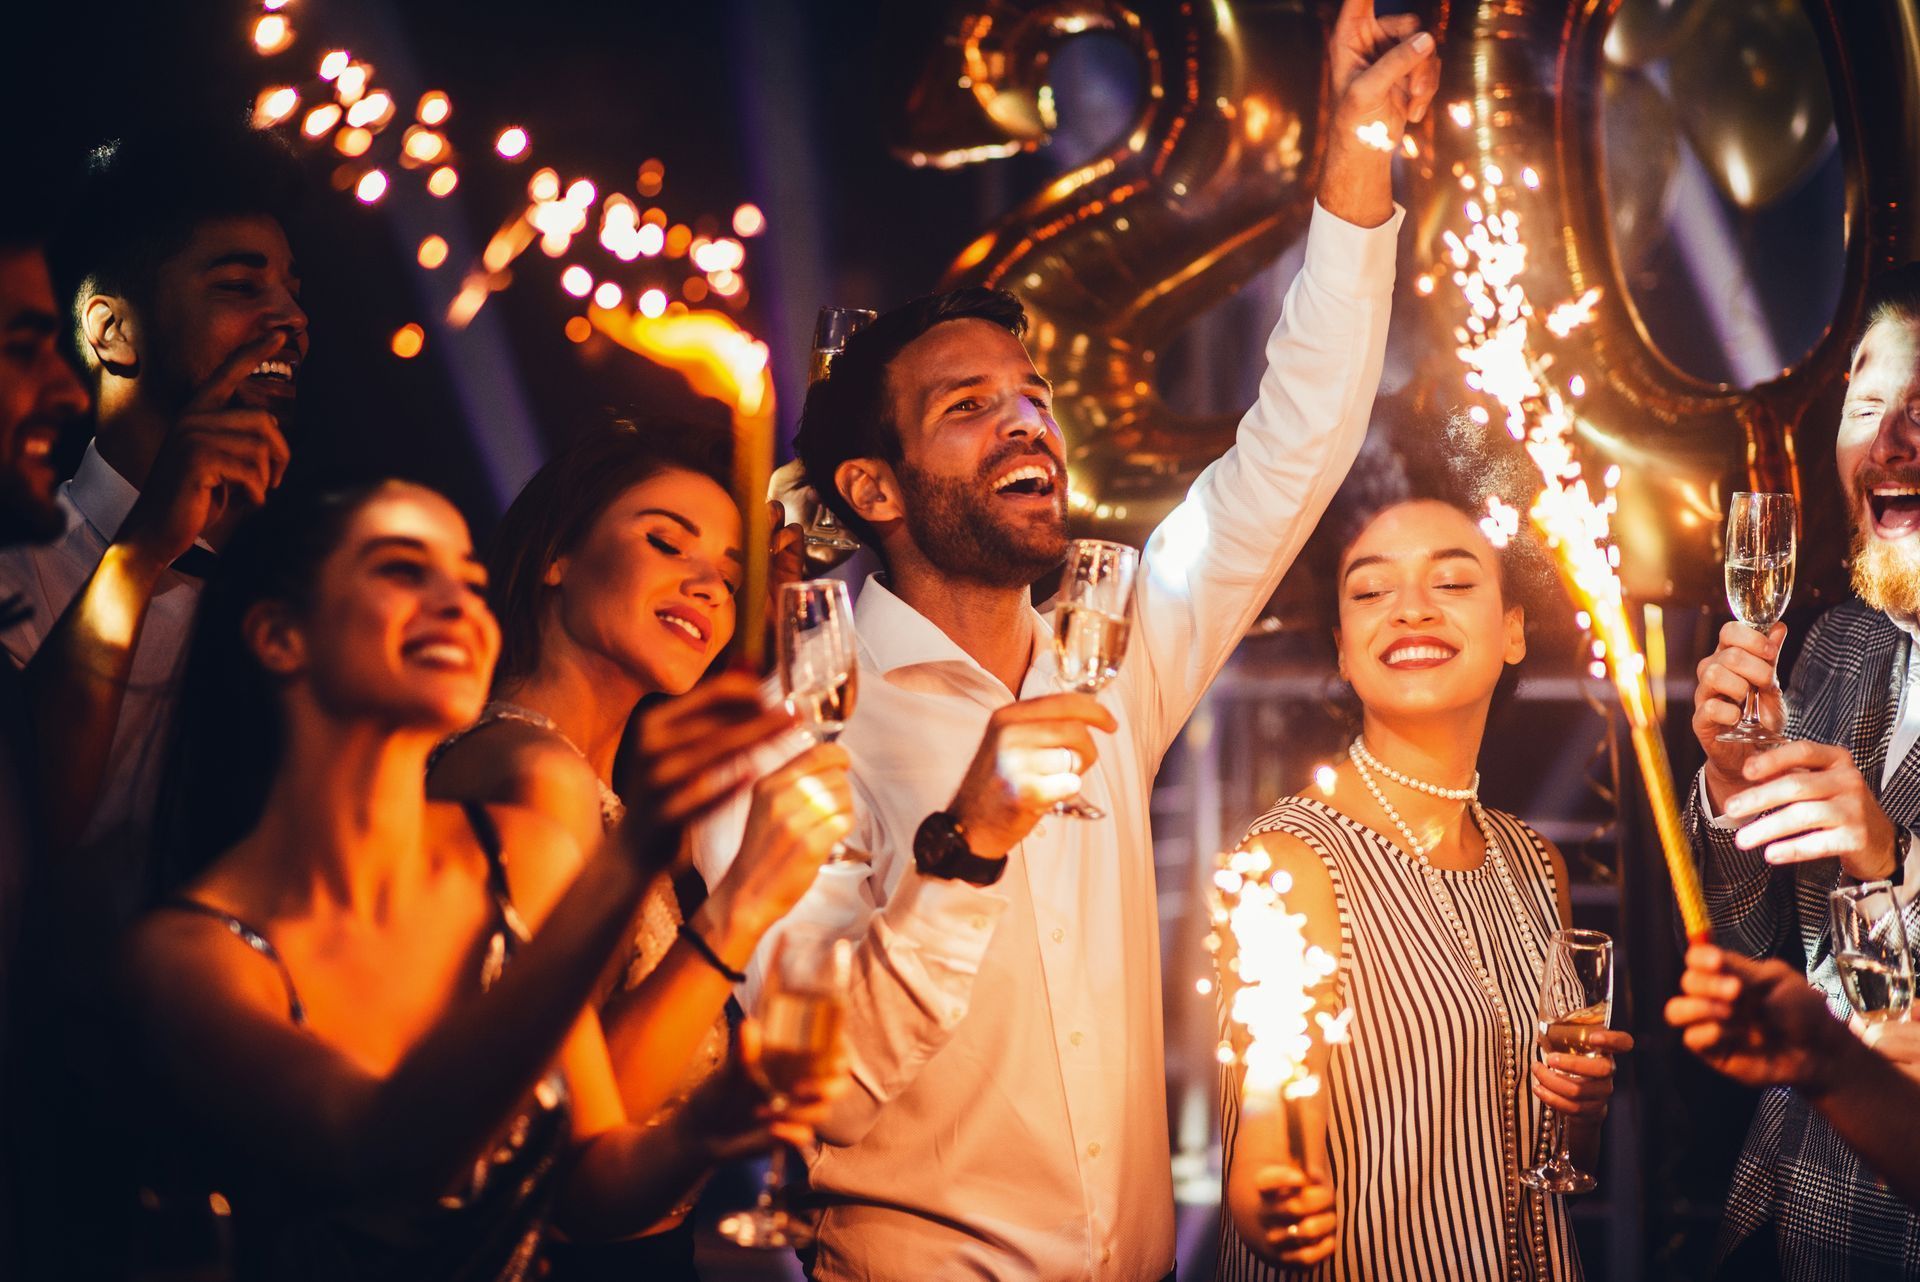 A group of people are holding sparklers and drinking champagne at a party.